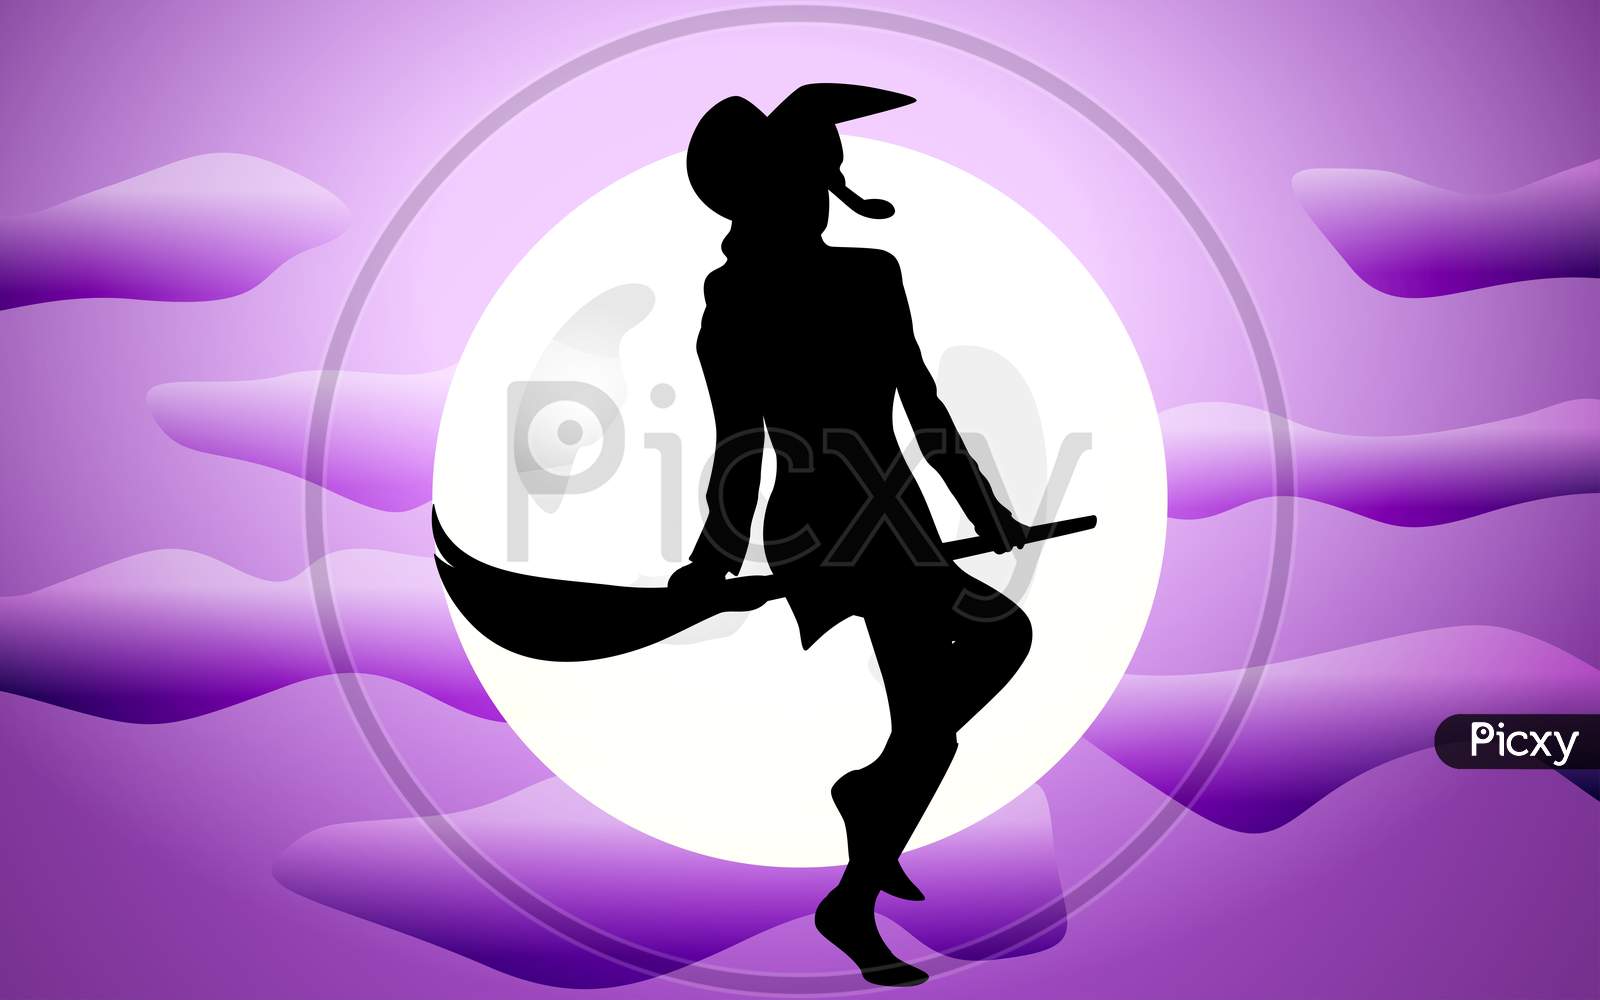 Witch In Front Of Full Moon, Hand Drawn Vector Illustration Of Witch With Broom, Hand Drawn Vector Illustration For Halloween Party Background And Invitation.